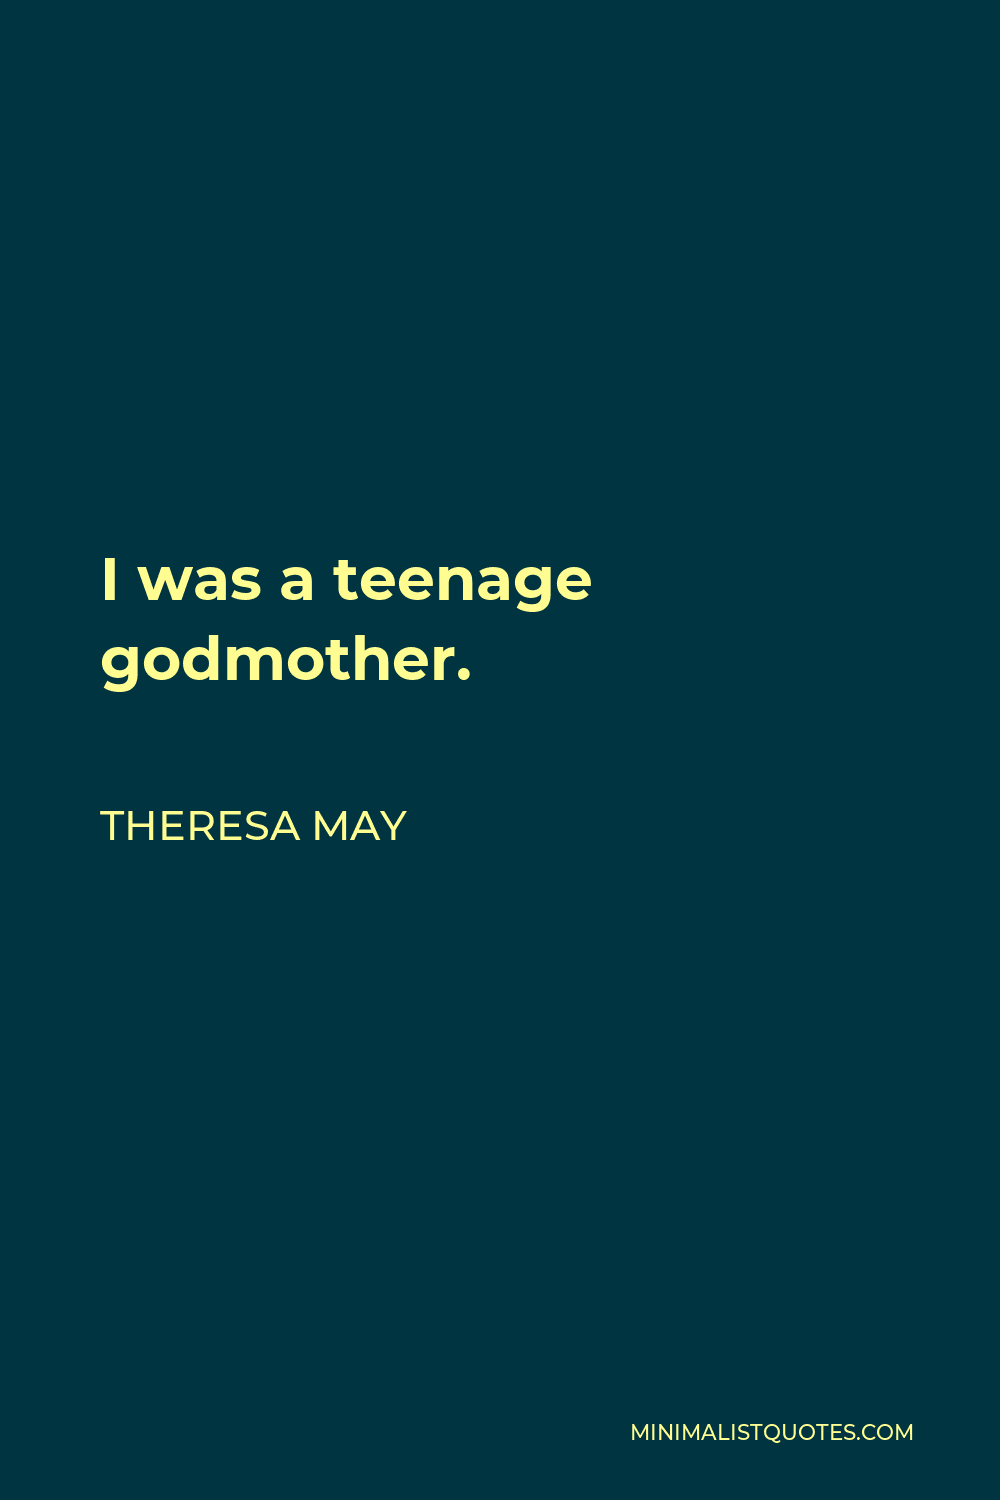 Theresa May Quote - I was a teenage godmother.